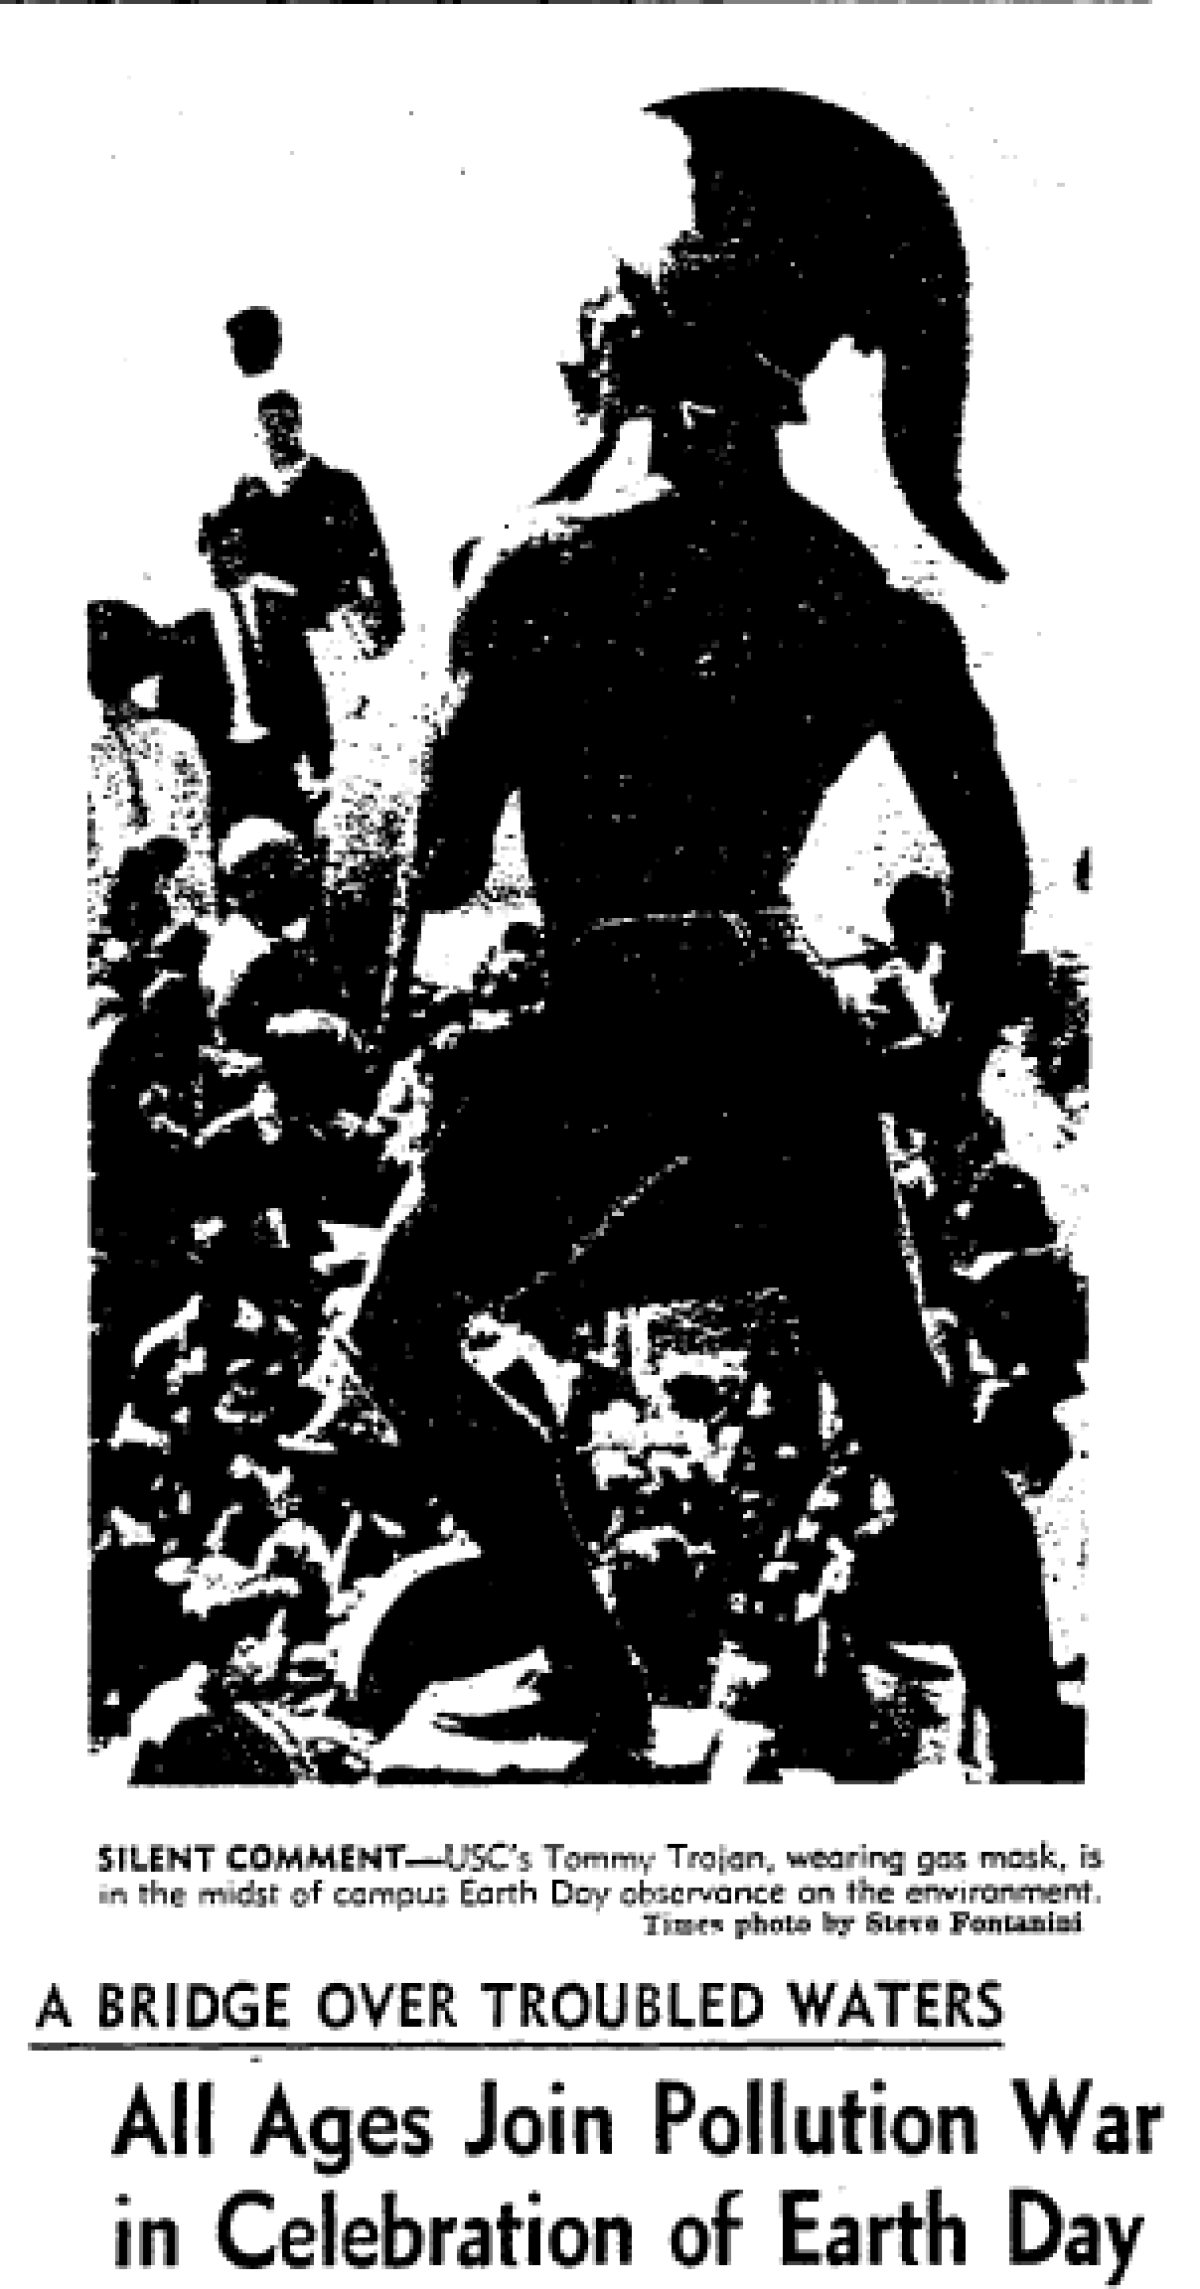 USC's Tommy Trojan, as seen on the front page of the Los Angeles Times on April 23, 1970, is shown wearing a gas mask as part of demonstrations for the first Earth Day.